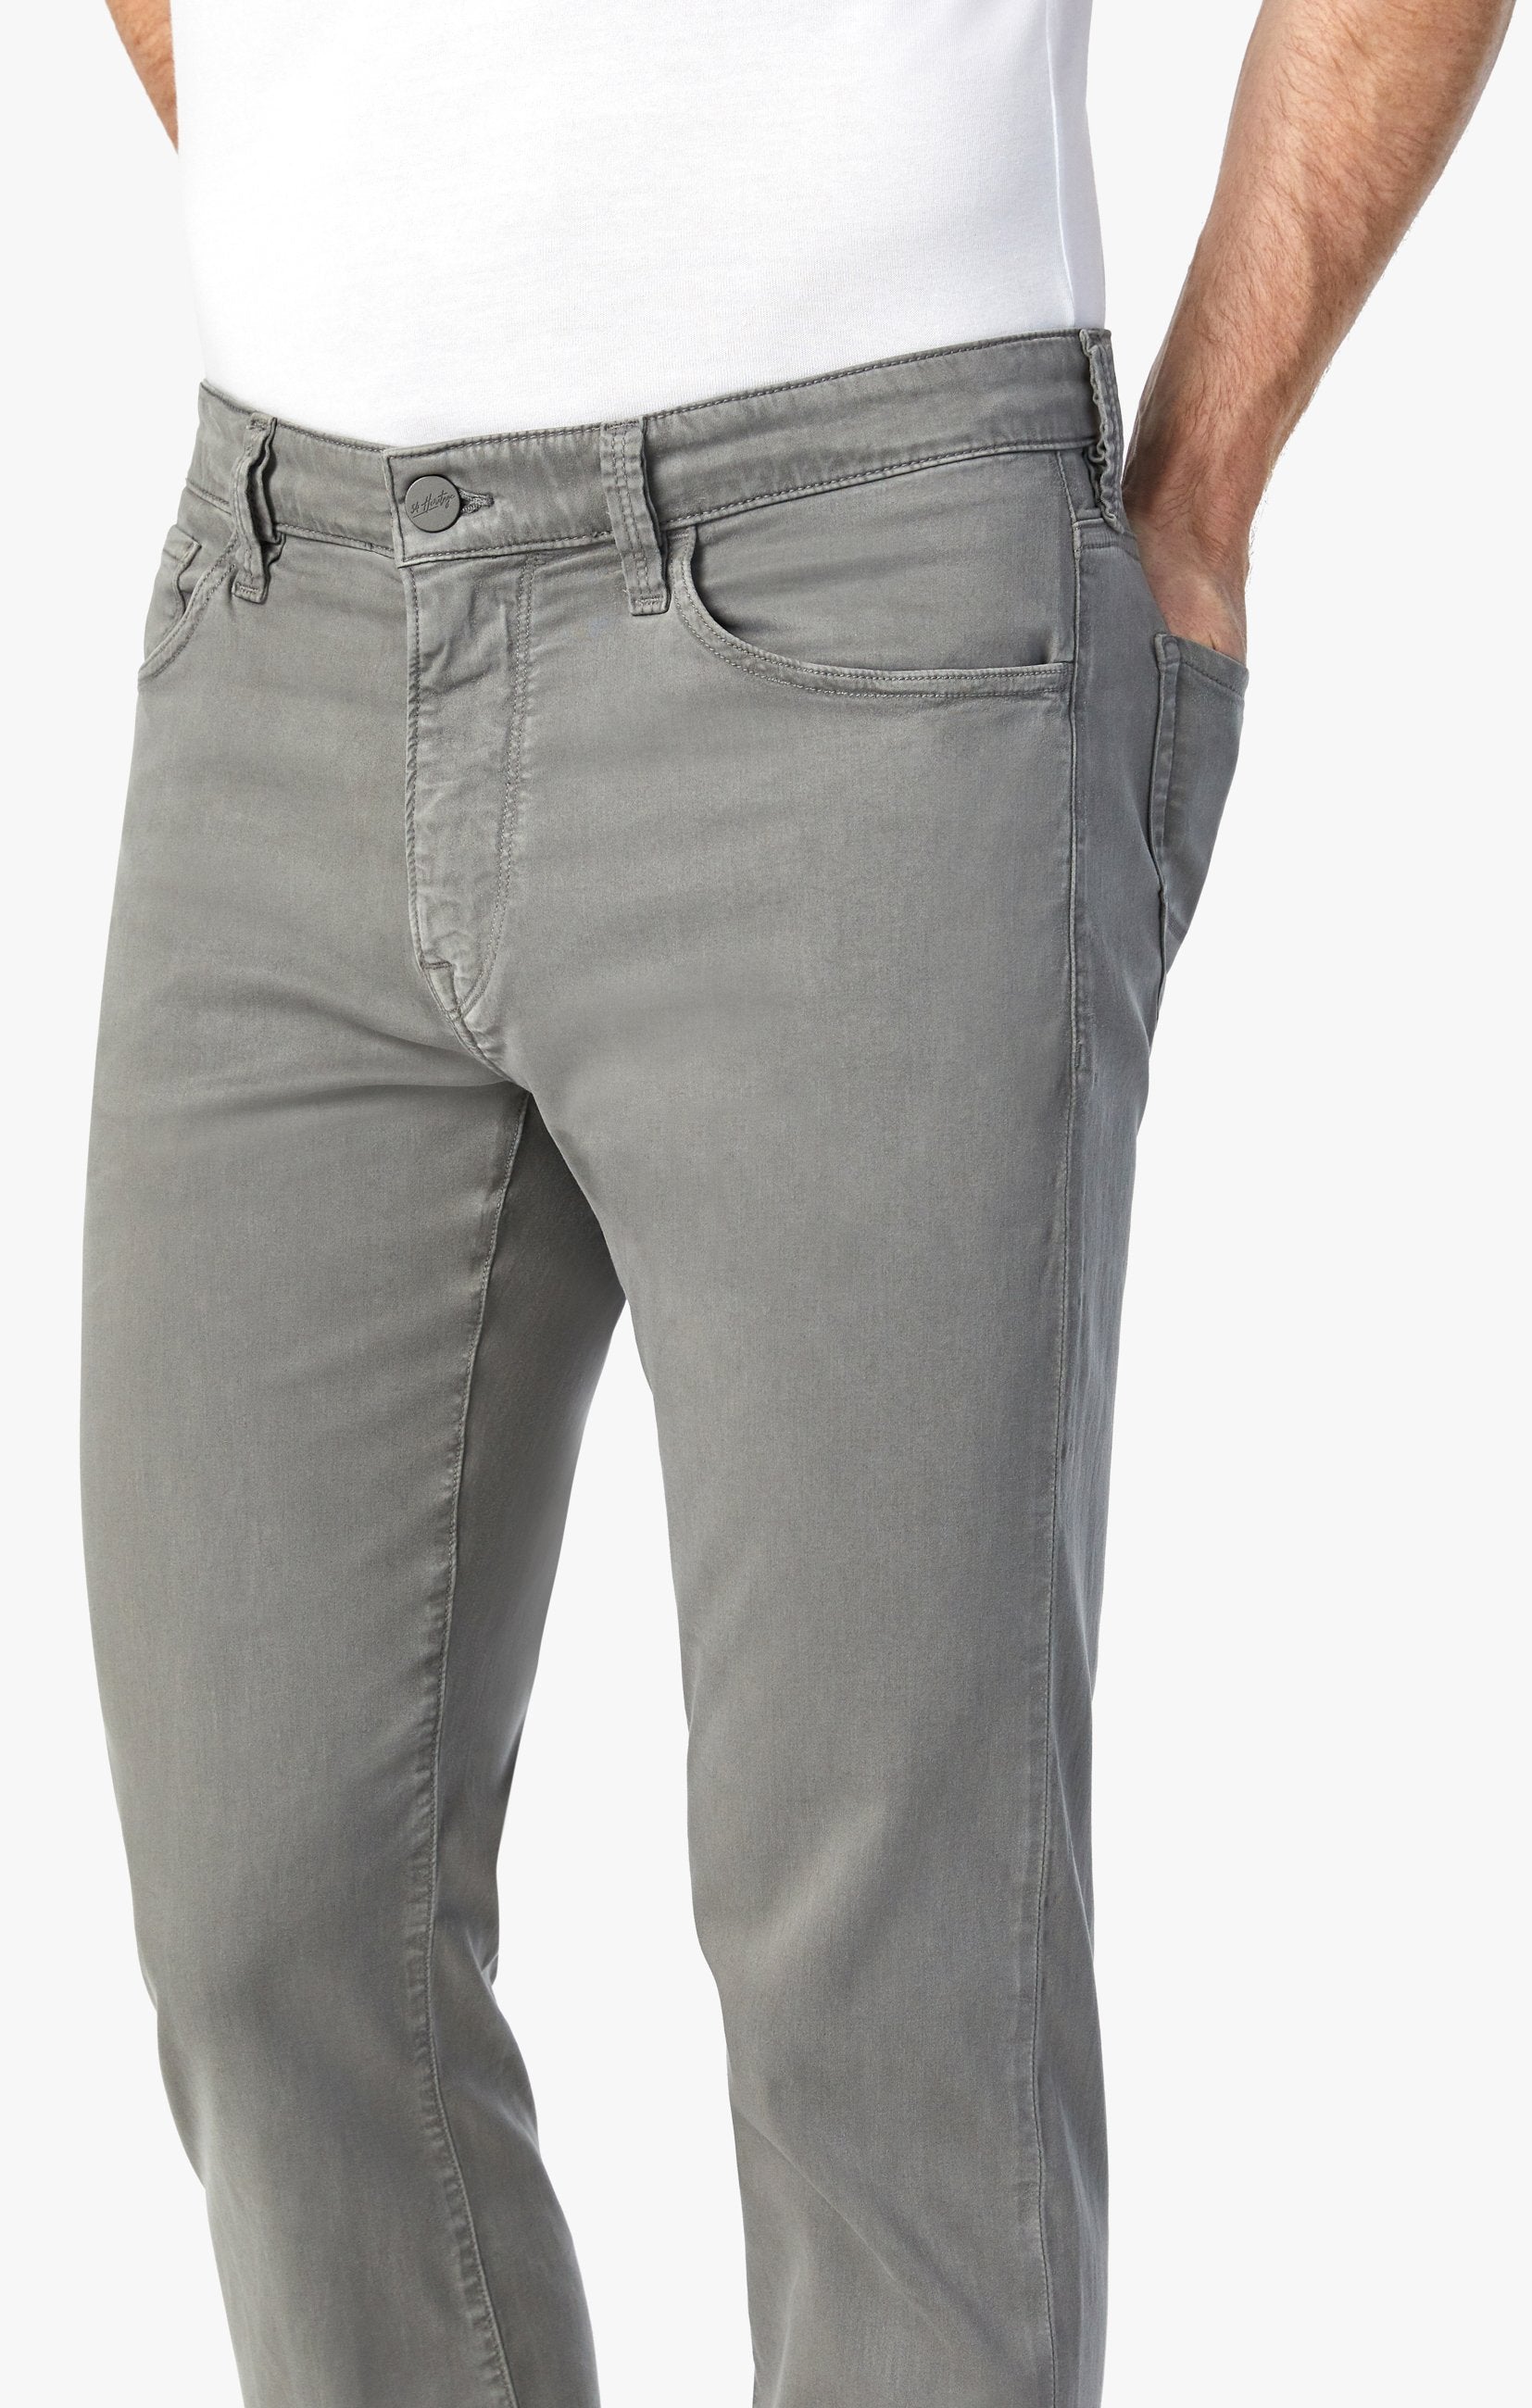 Courage Straight Leg Pants In Pewter Twill Image 6